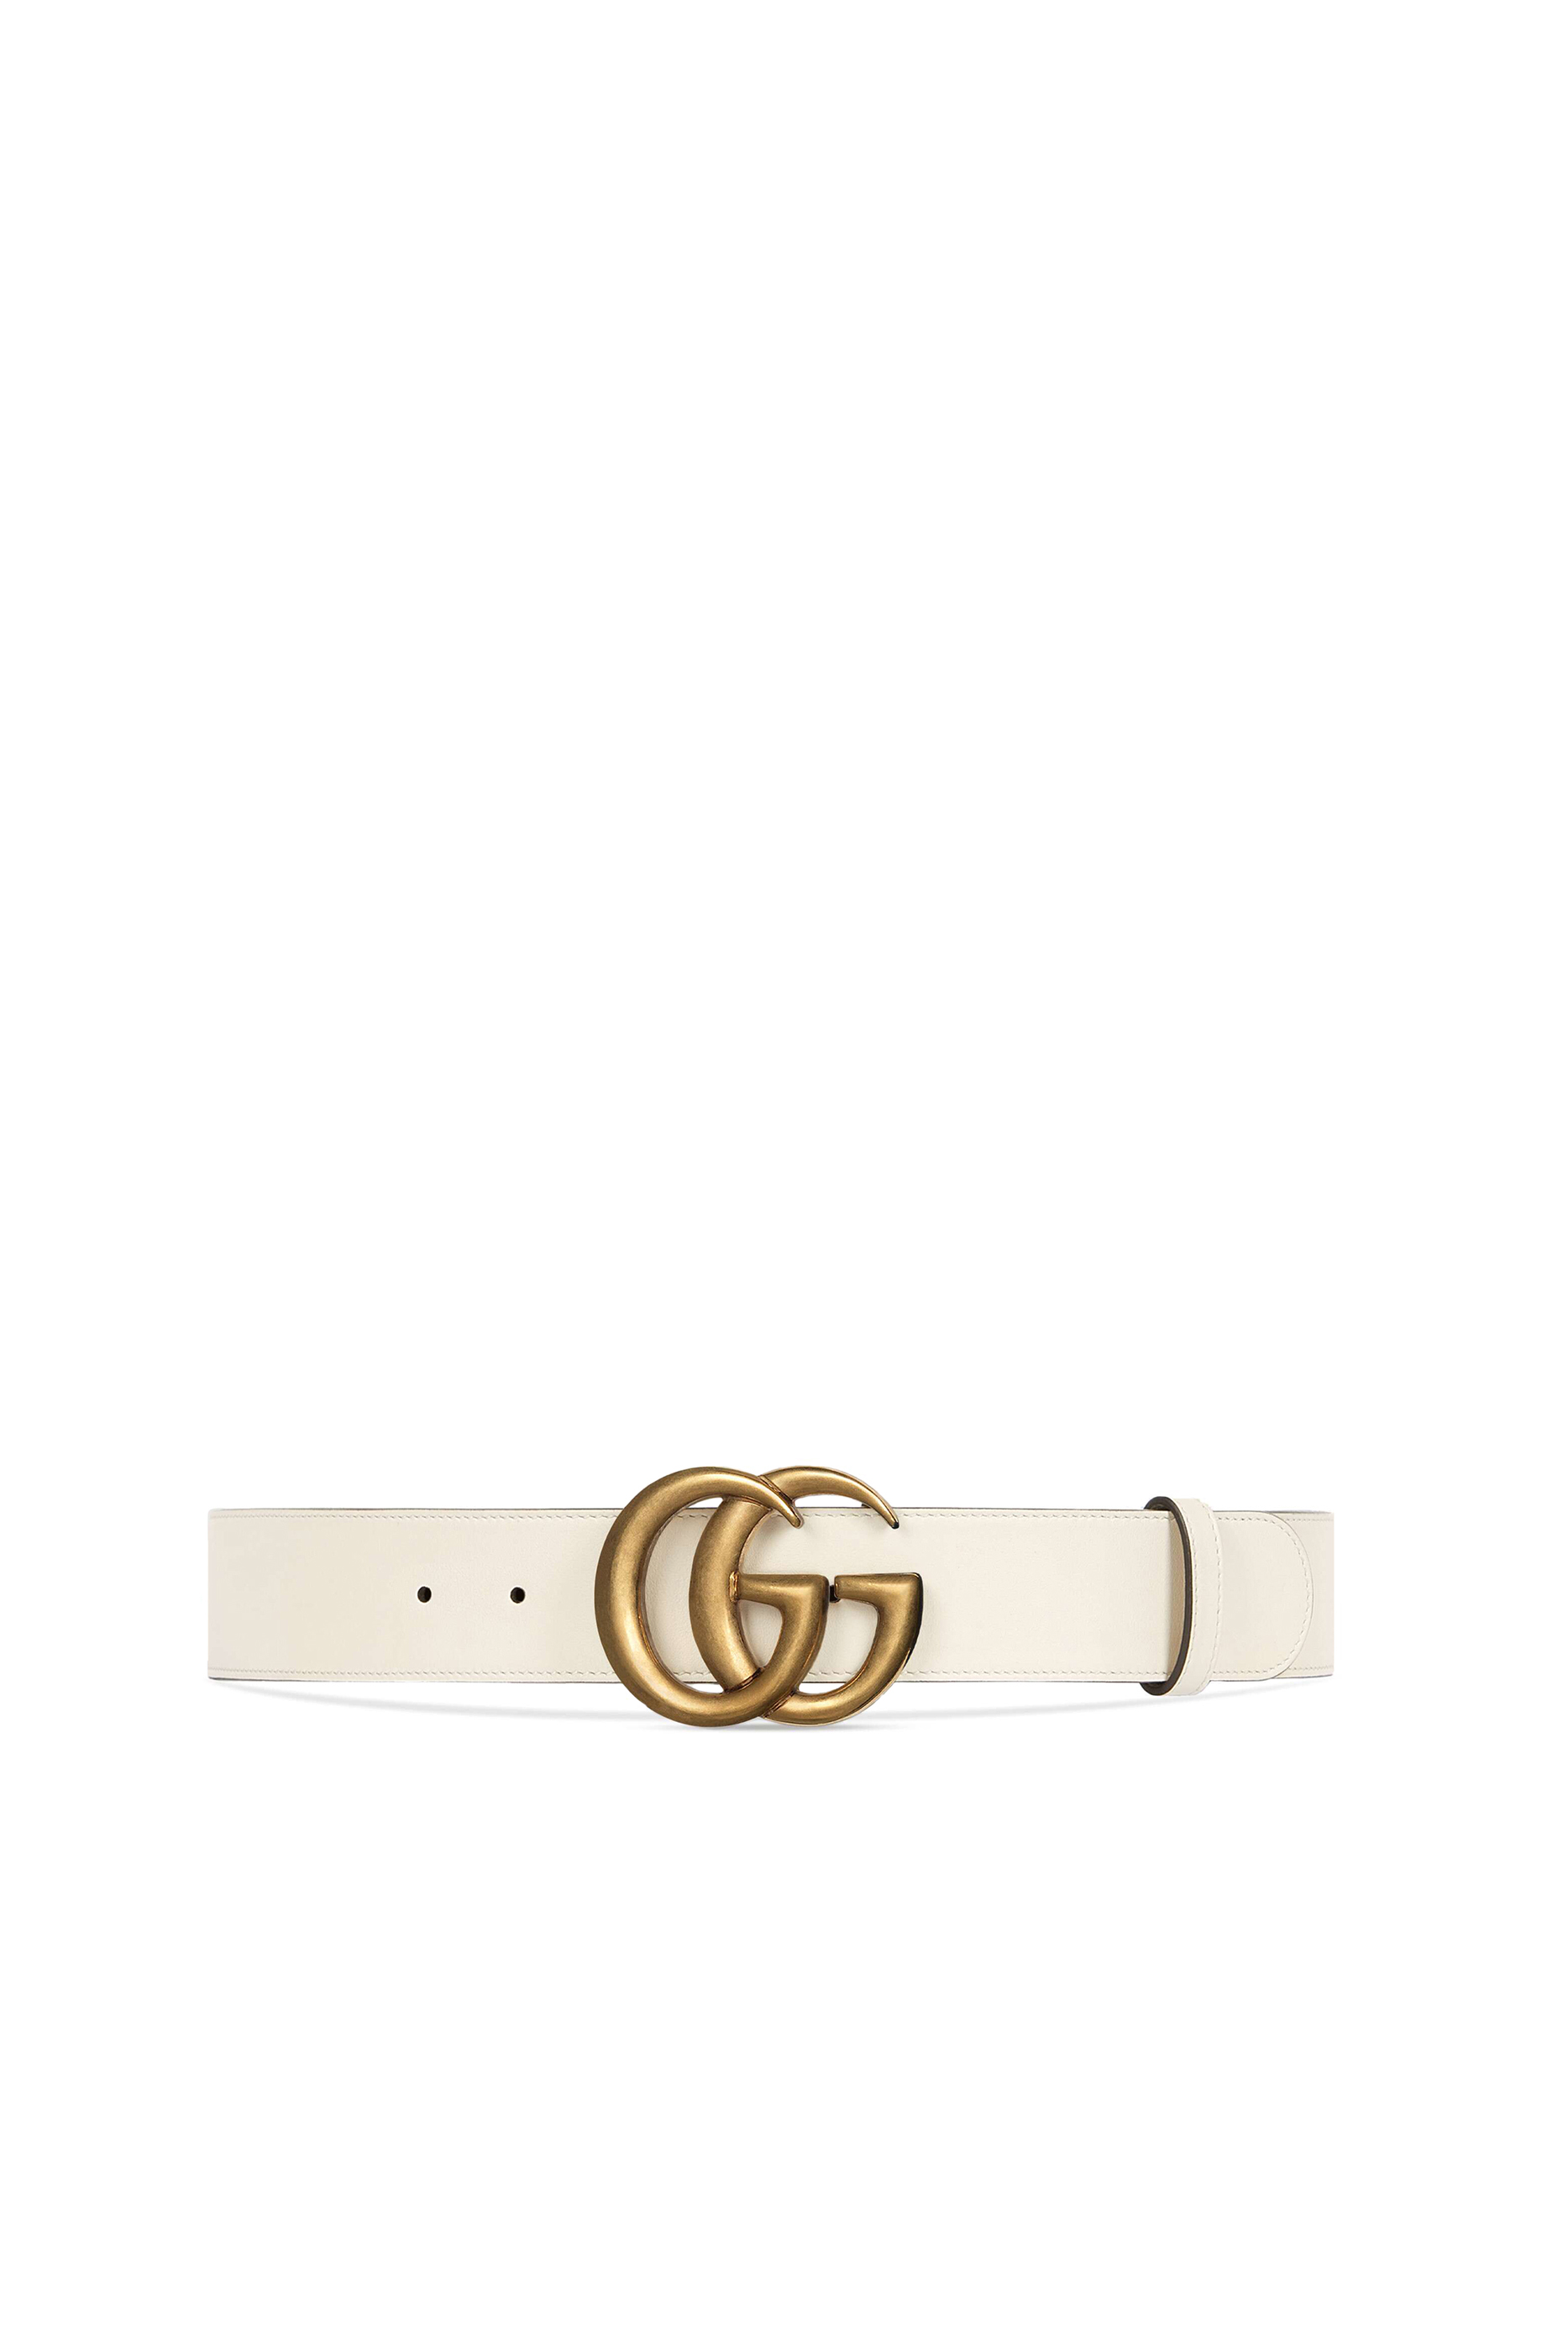 Buy Gucci Wide Leather Double G Belt for Womens | Bloomingdale's UAE